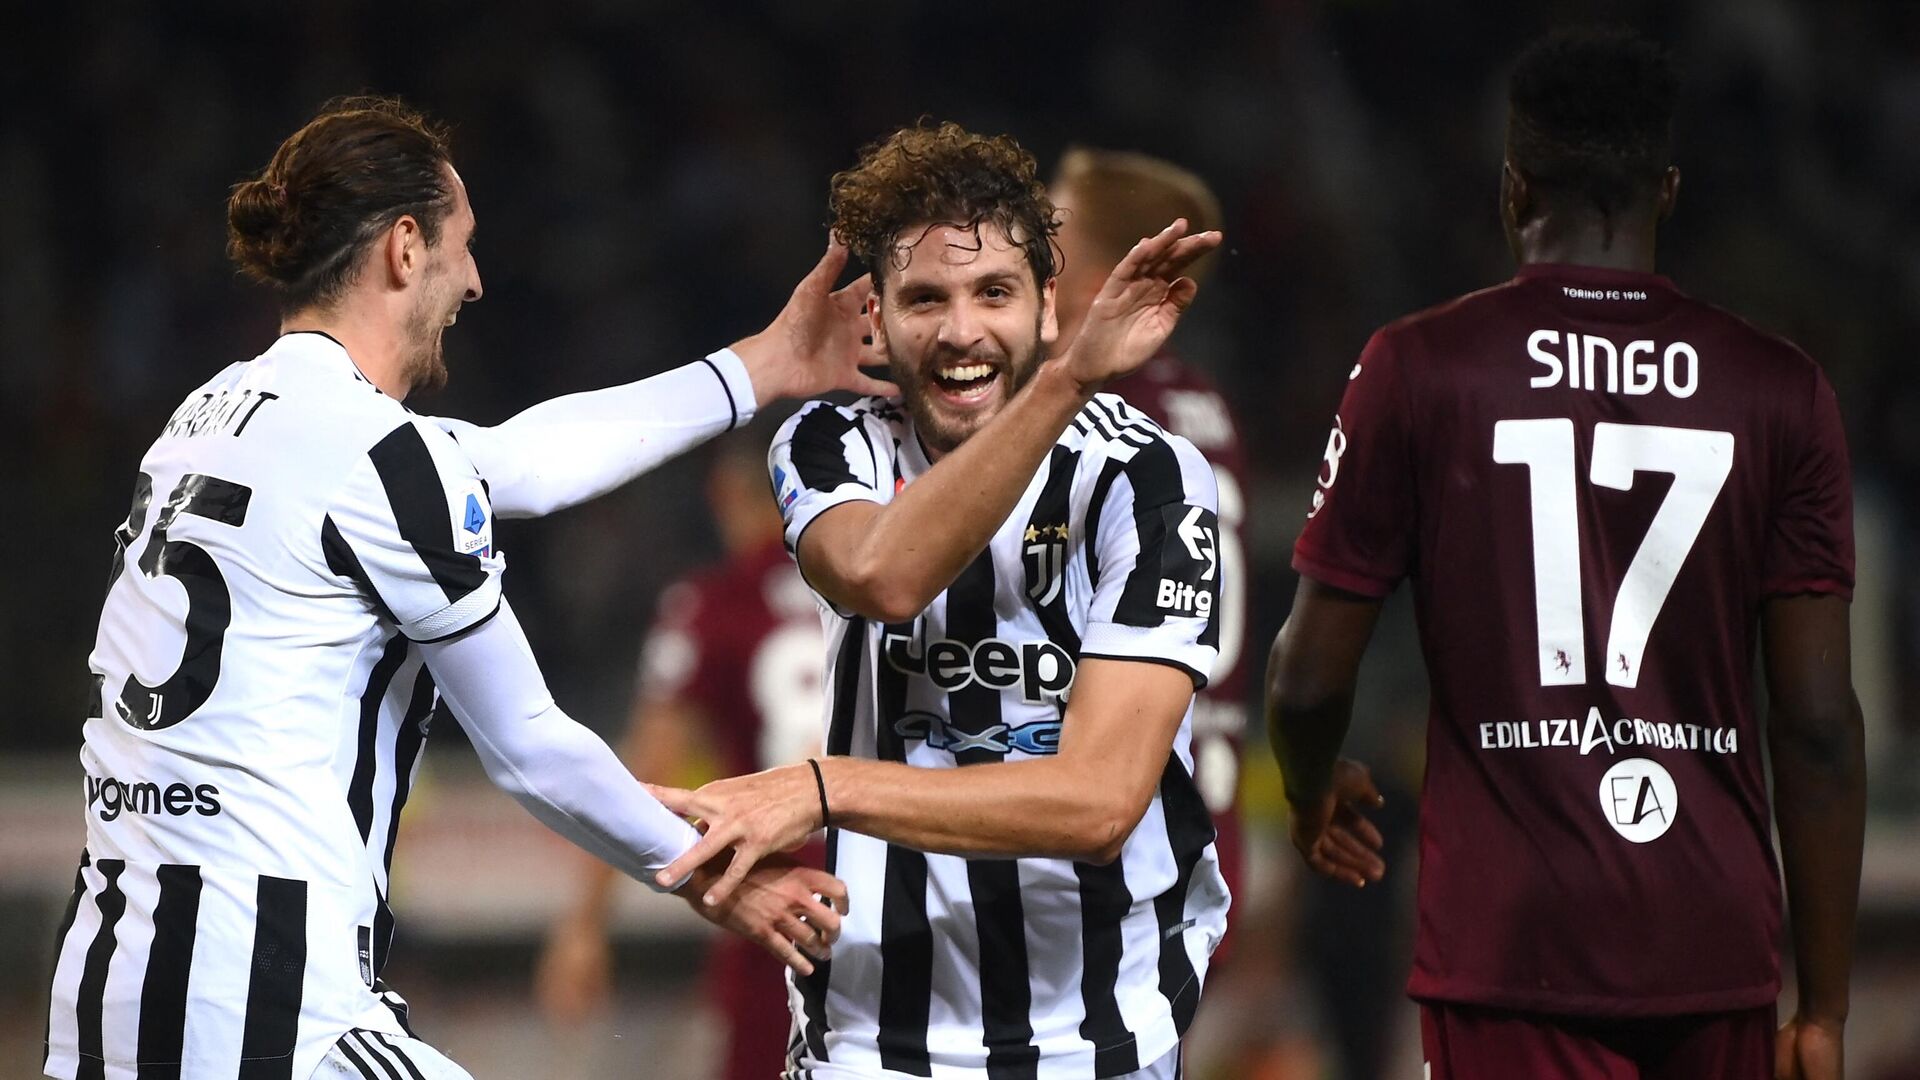 Juventus' Italian midfielder Manuel Locatelli (C) celebrates with French midfielder Adrien Rabiot (L) after scoring a goal during the Italian Serie A football match between Torino and Juventus at the Grande Torino Stadium in Turin on October 2, 2021. (Photo by Marco BERTORELLO / AFP) - РИА Новости, 1920, 02.10.2021